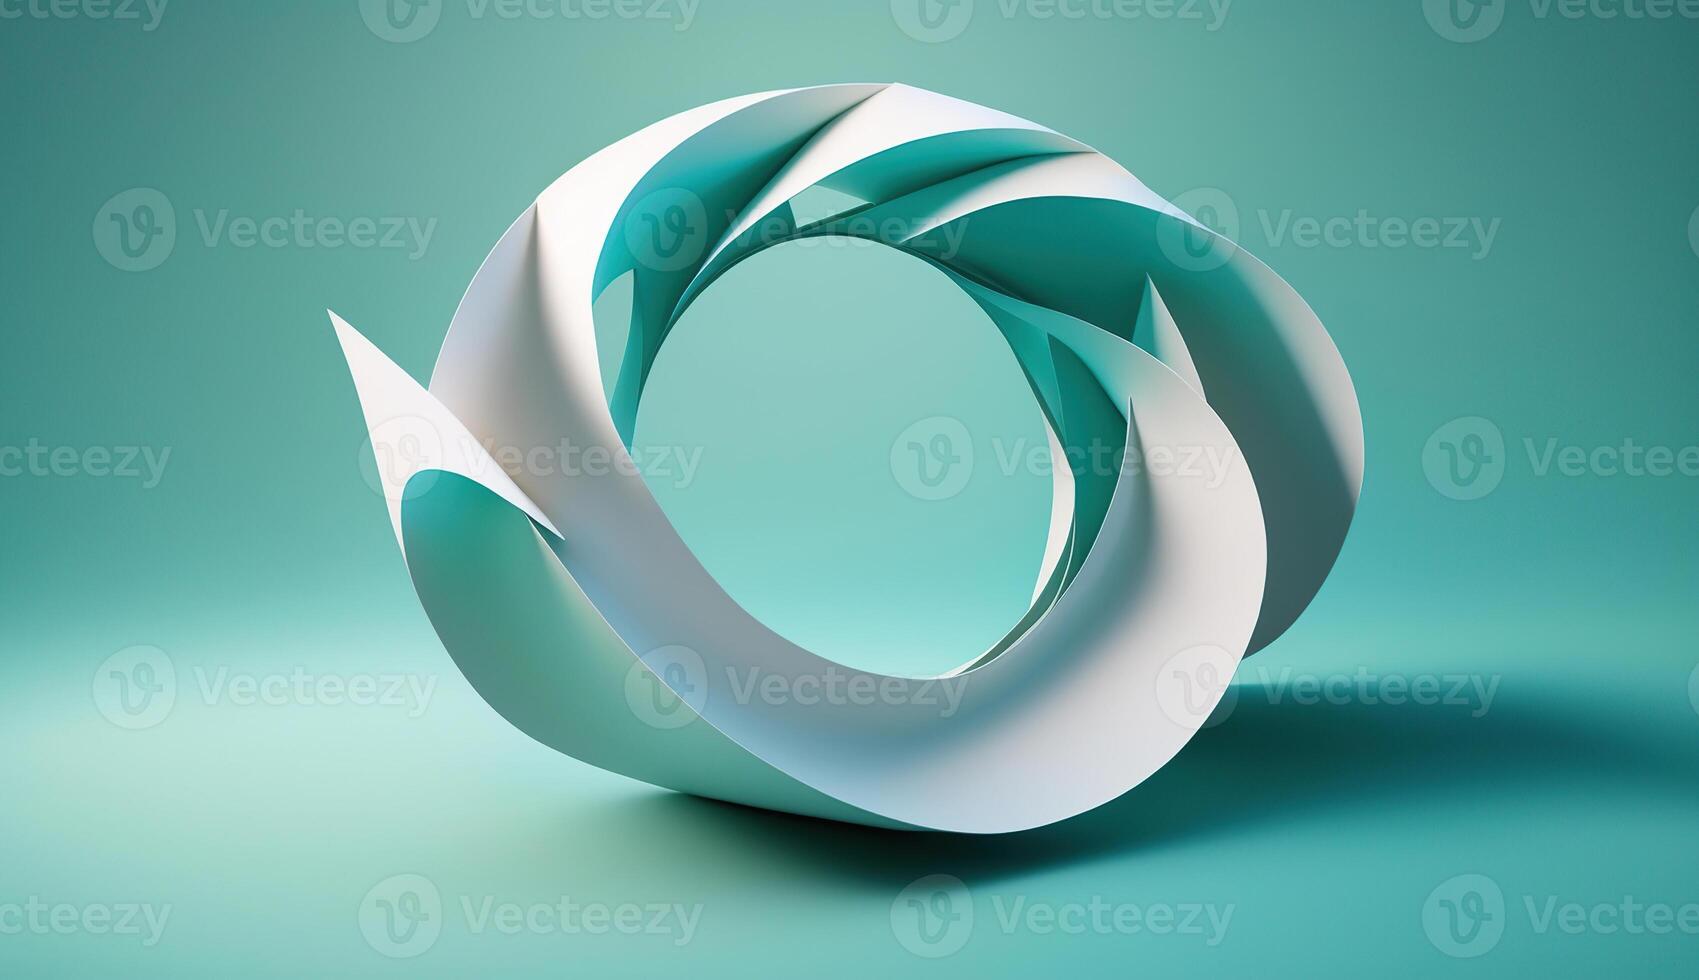 Mobius strip made from paper soaring in the air on mint background. Trendy surreal airy image. Abstract year color concept composition, photo